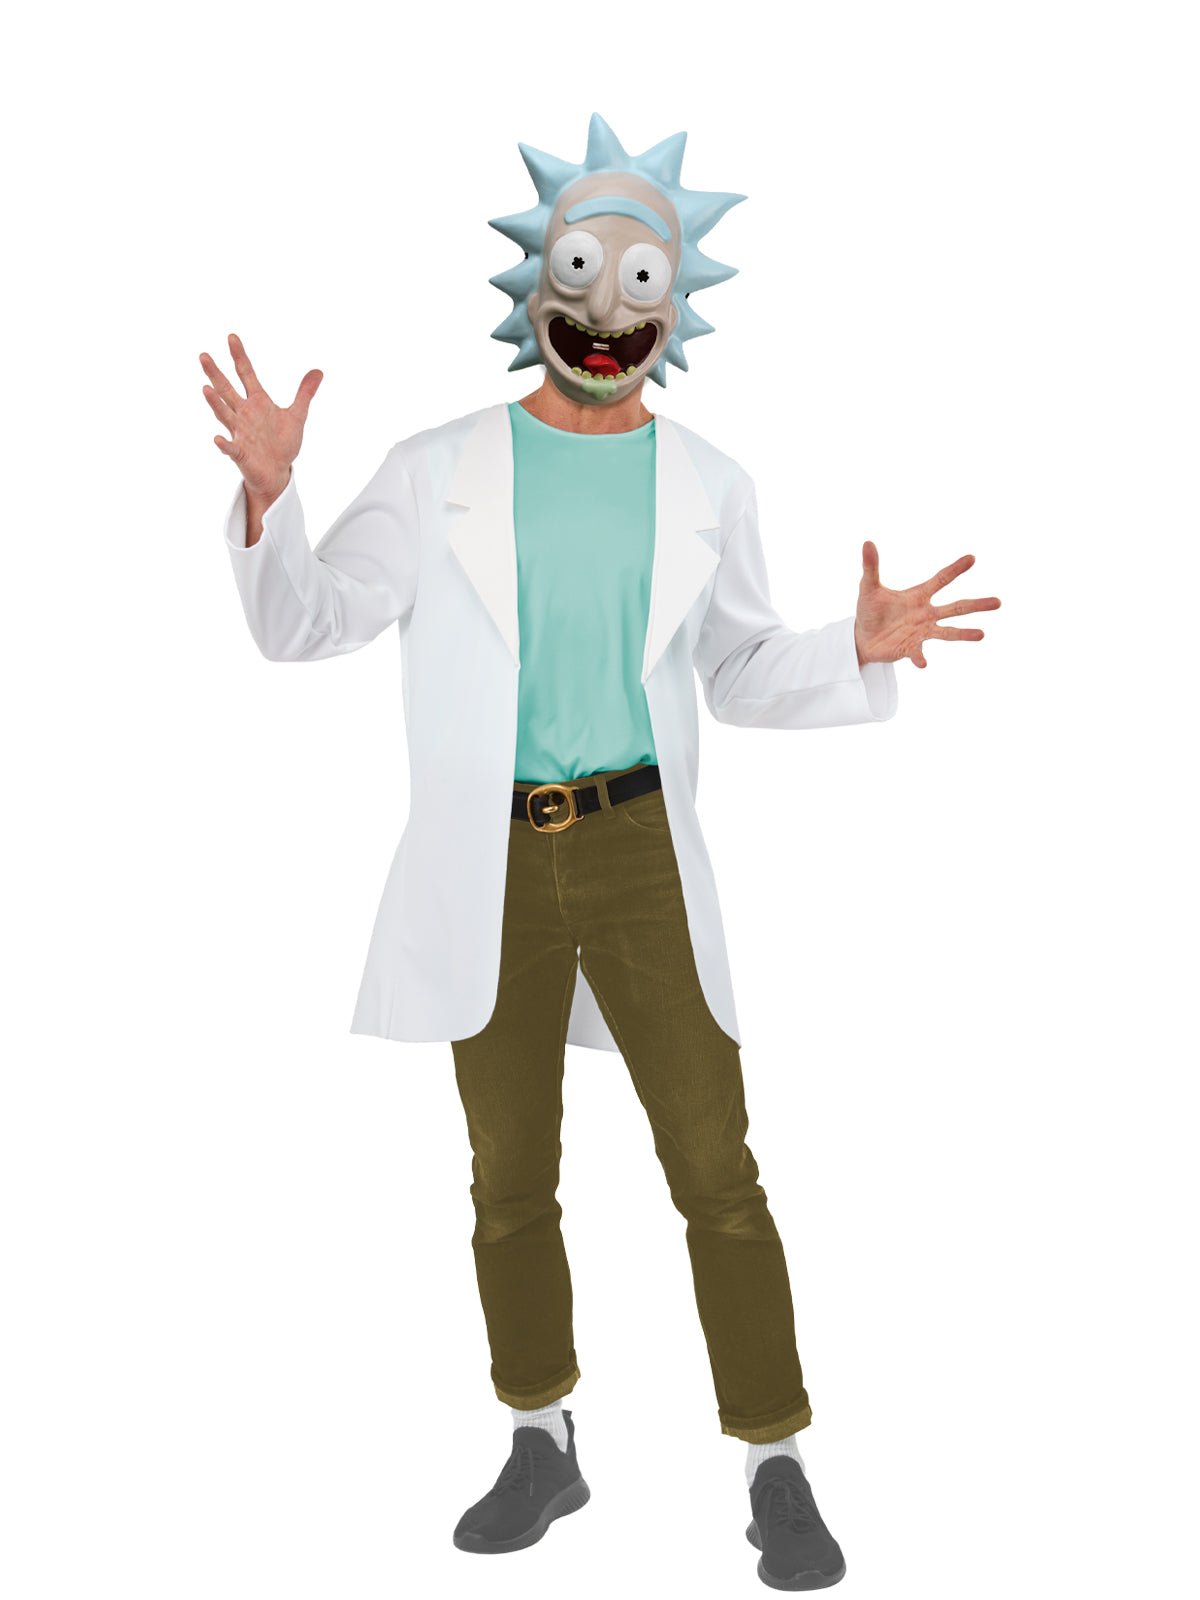 Shop the Look: Rick Costume for Adults